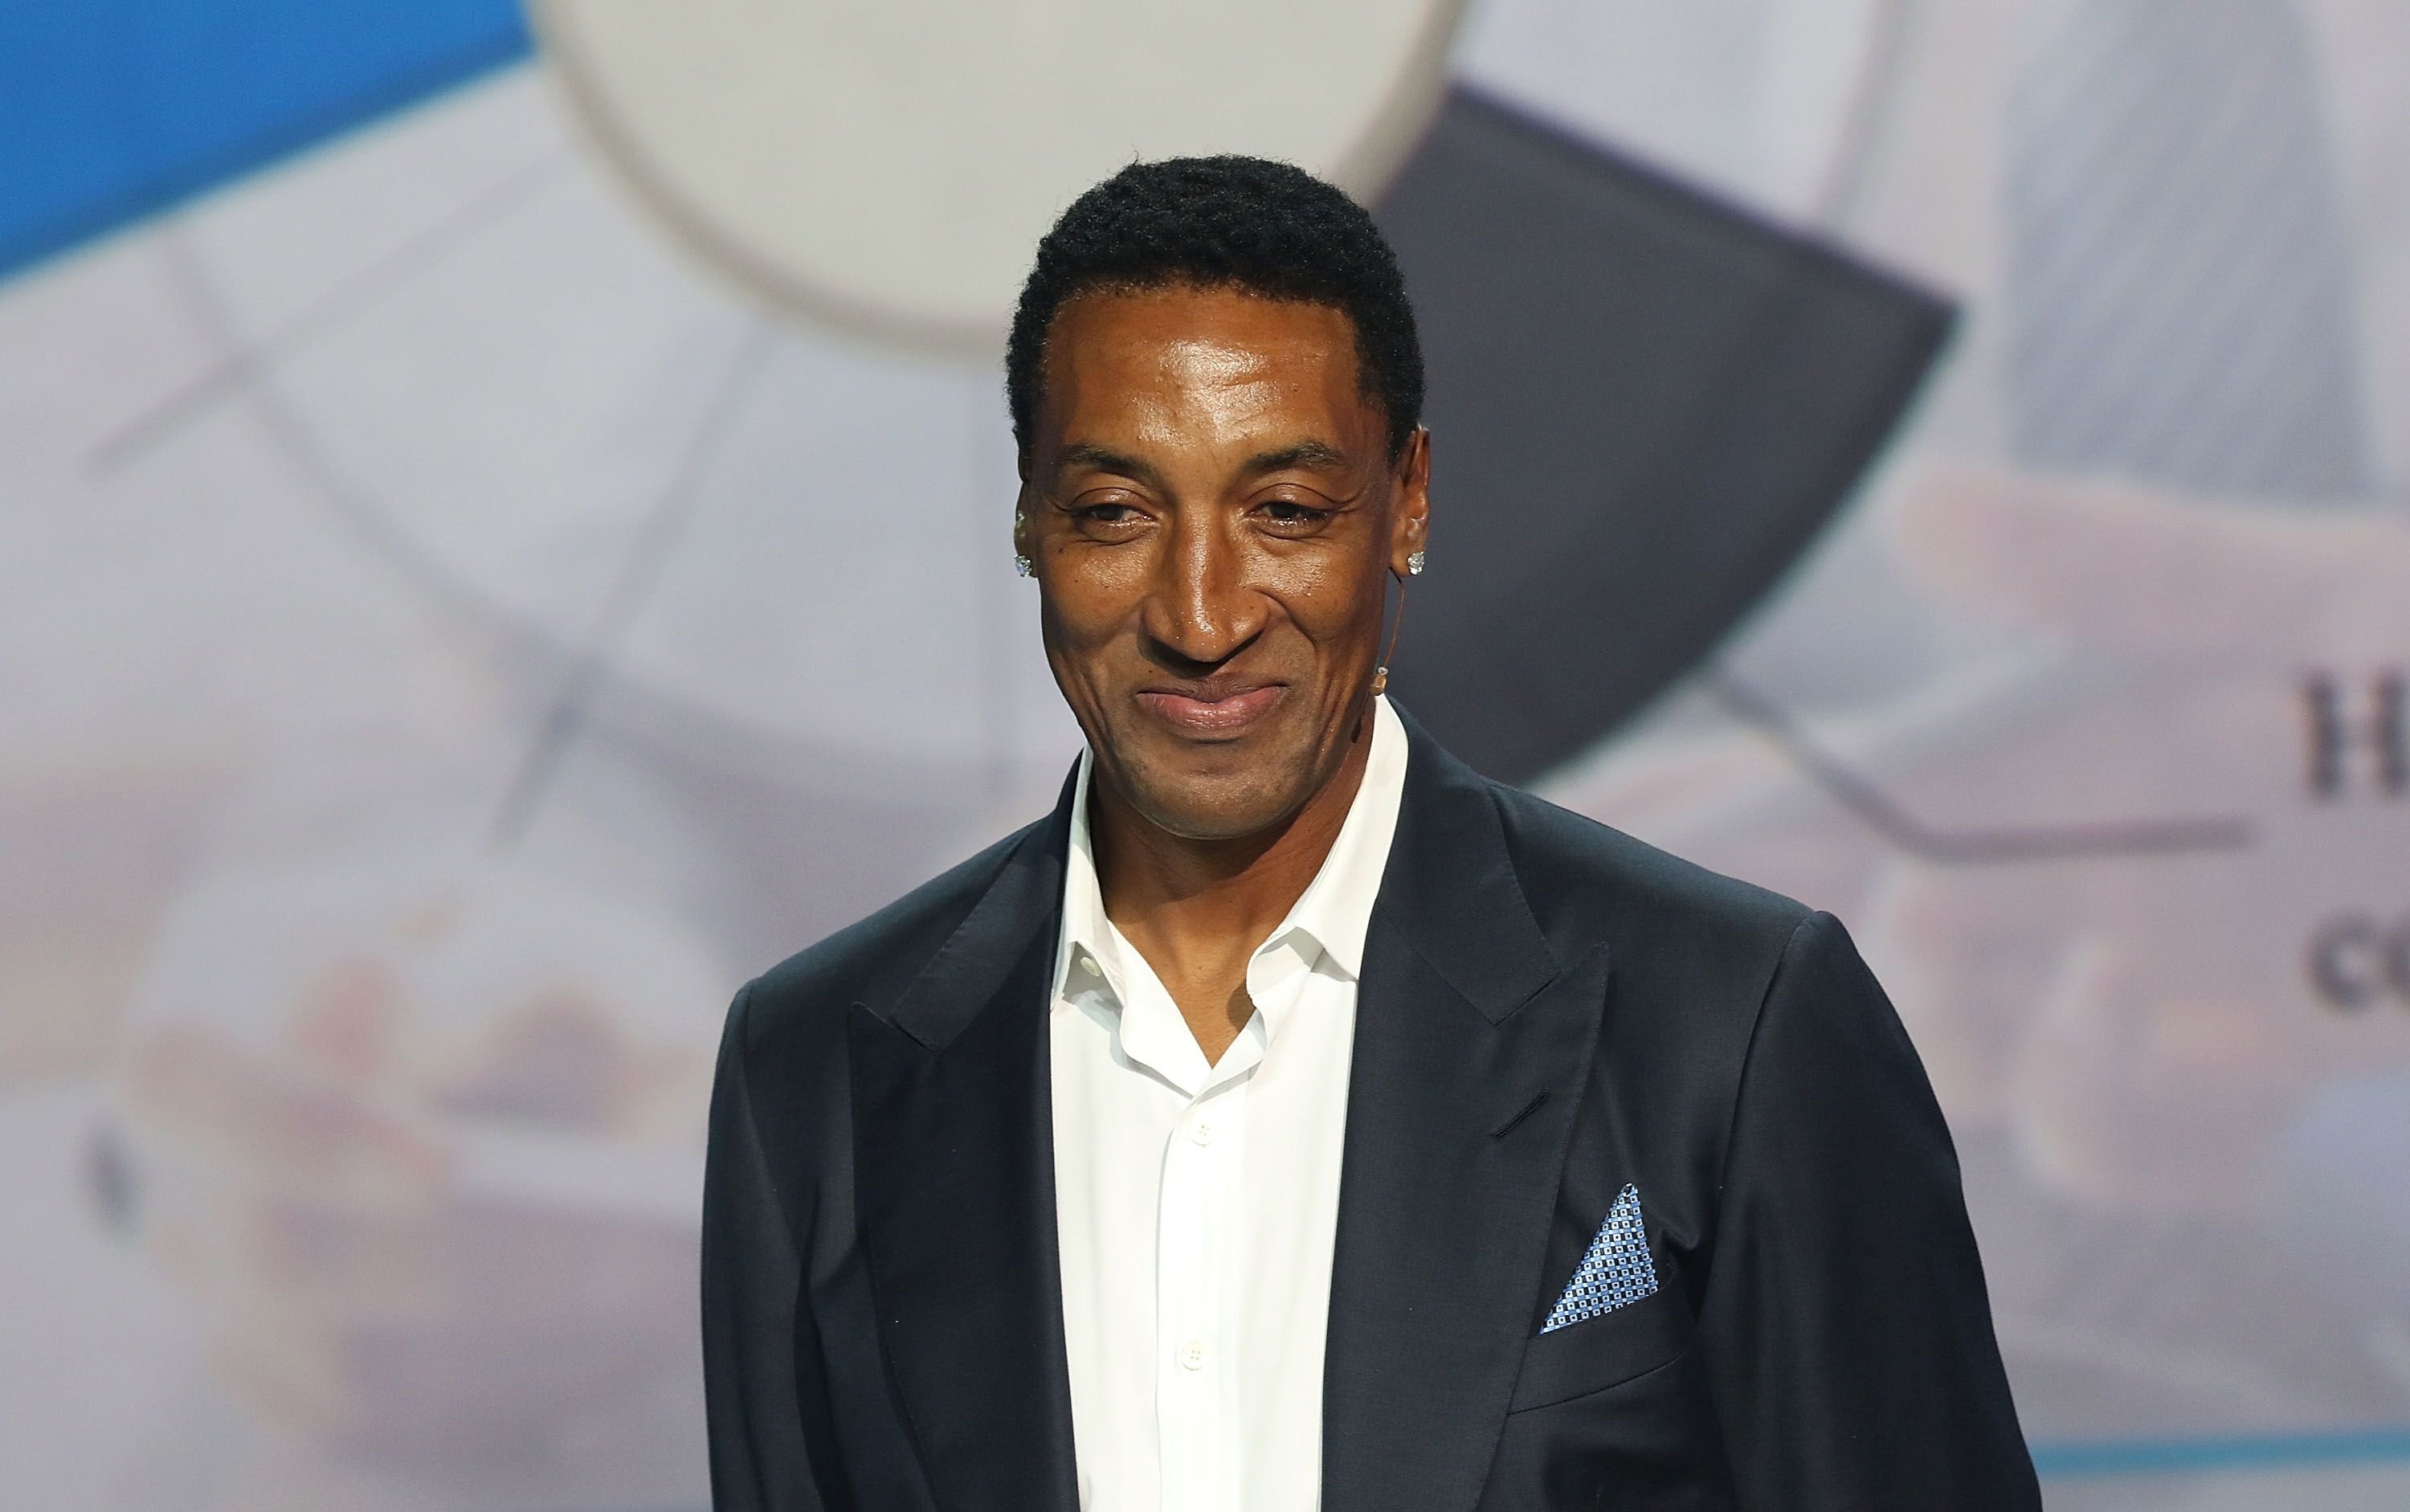 Scottie Pippen At Market America Conference 2016 at American Airlines Arena on February 4, 2016 | Photo: Getty Images